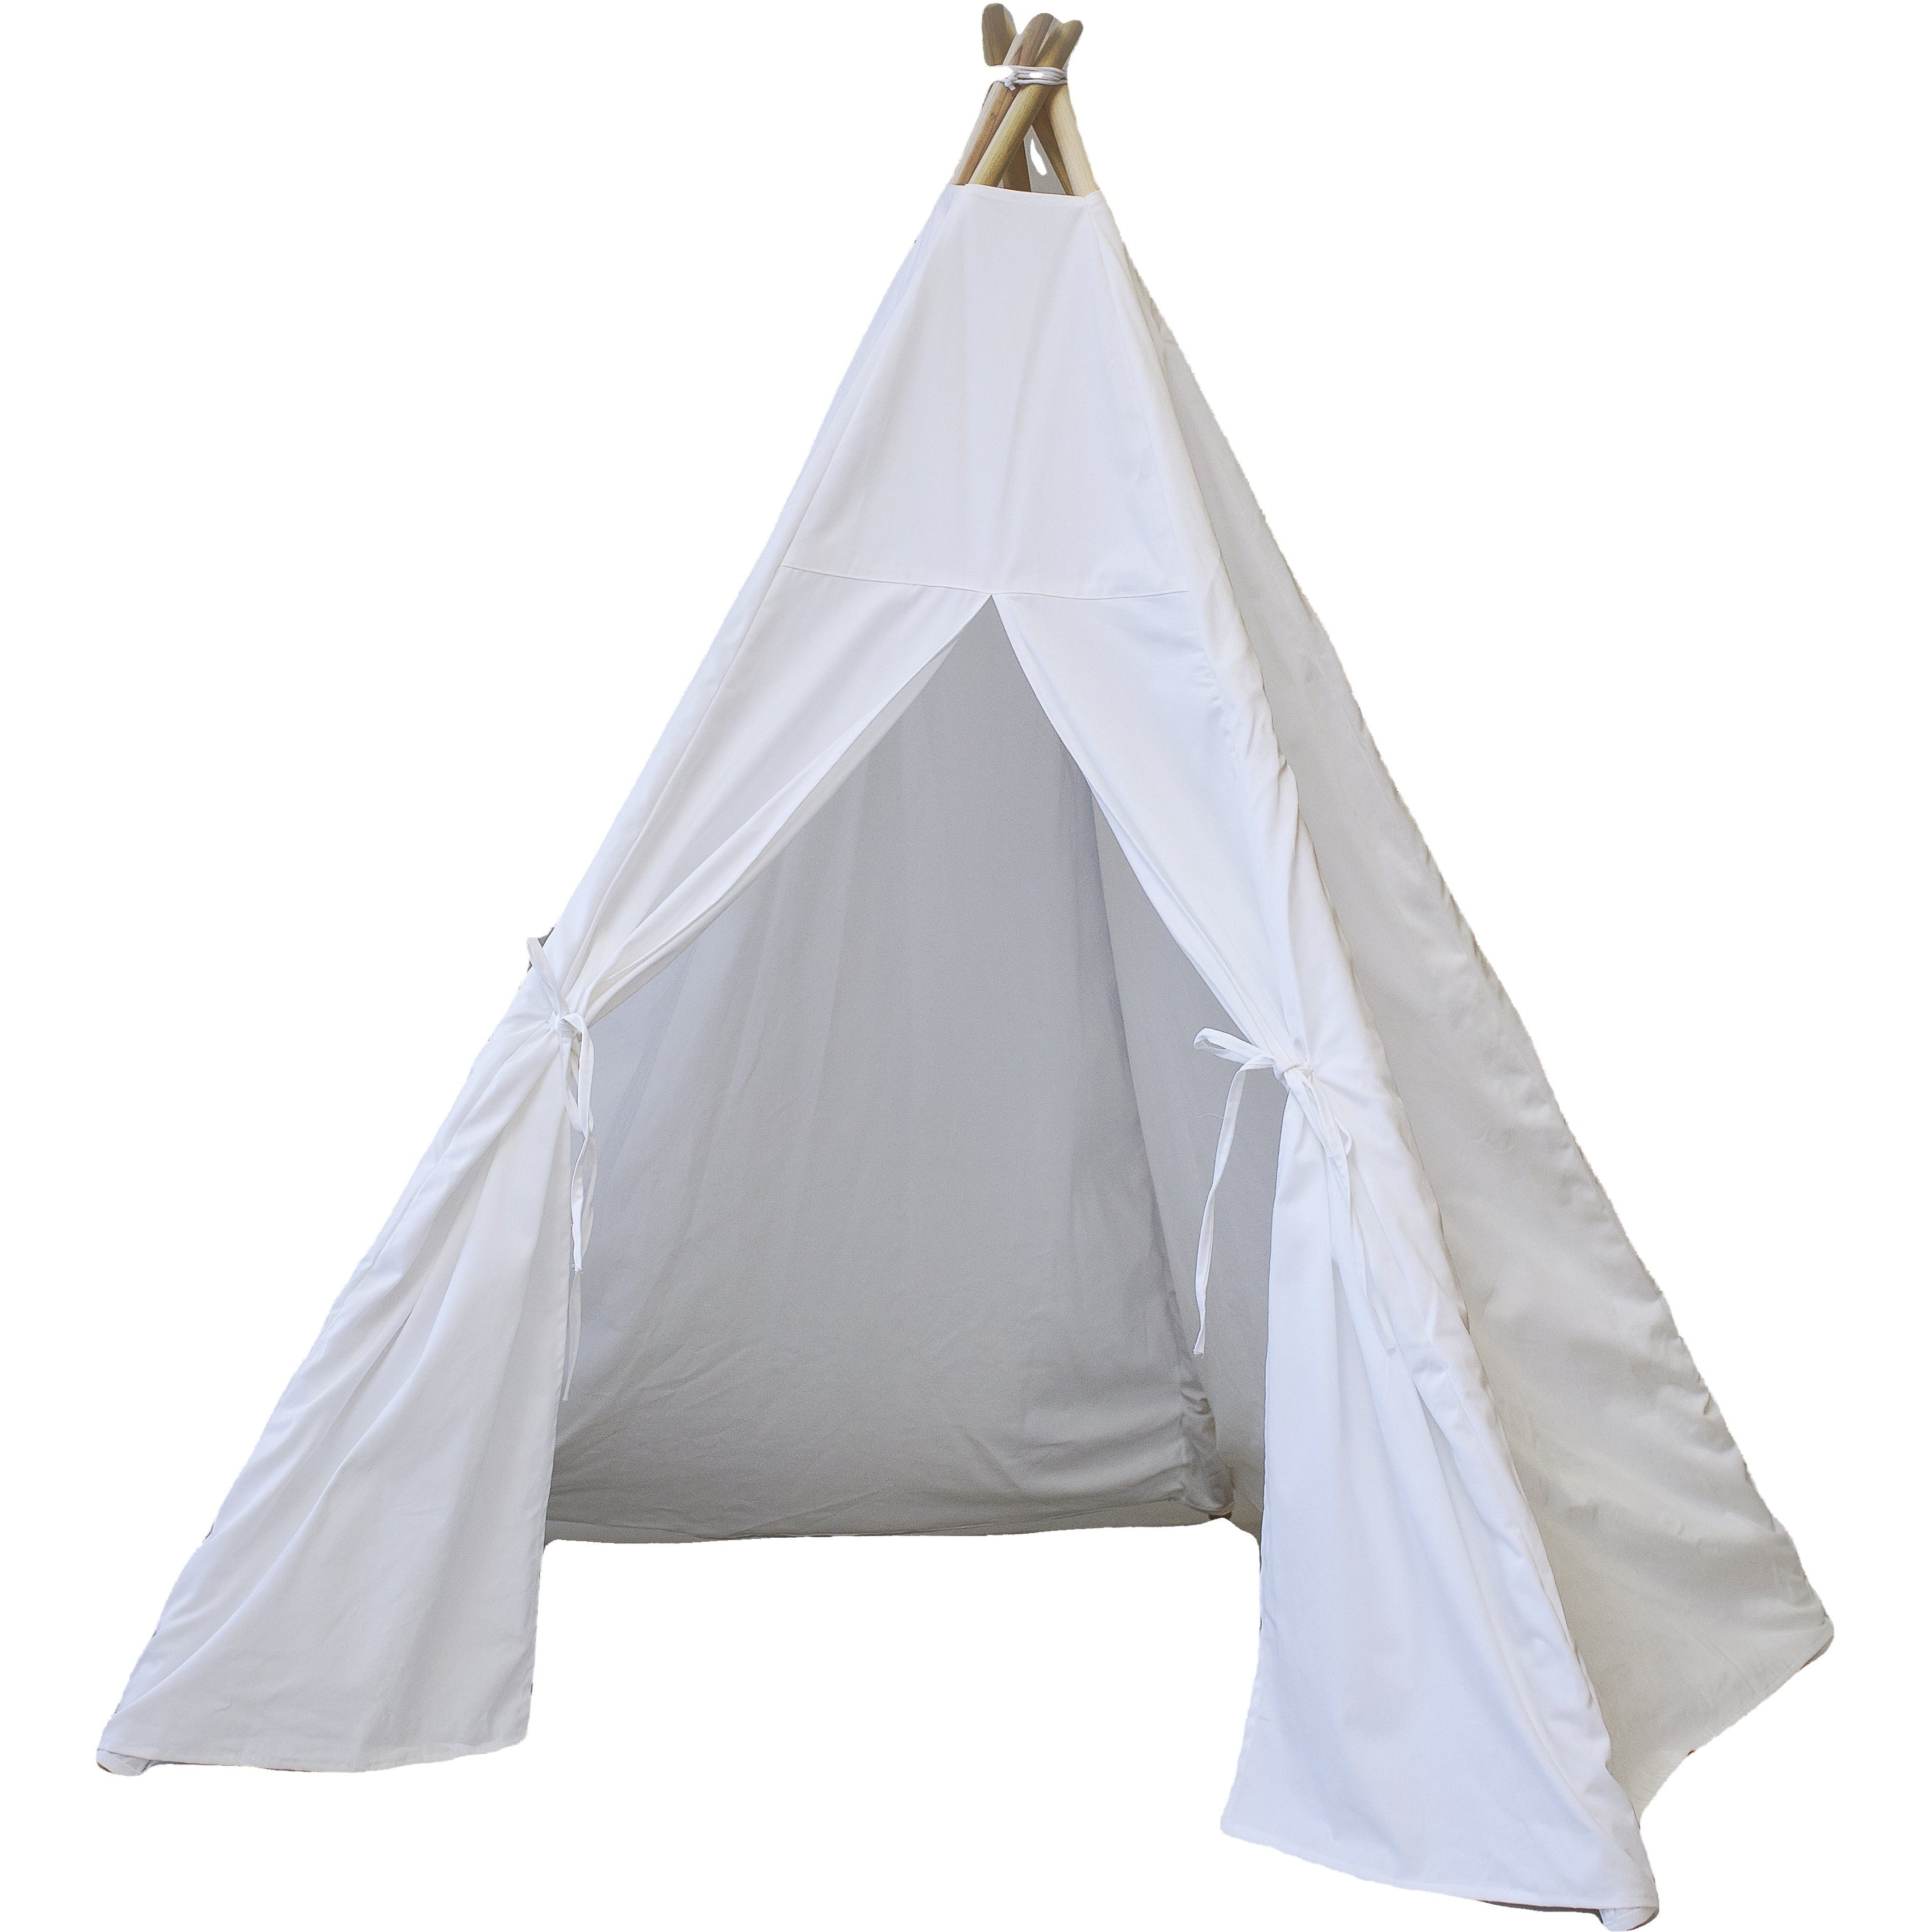 The 5 Sided Beckett Play Tent